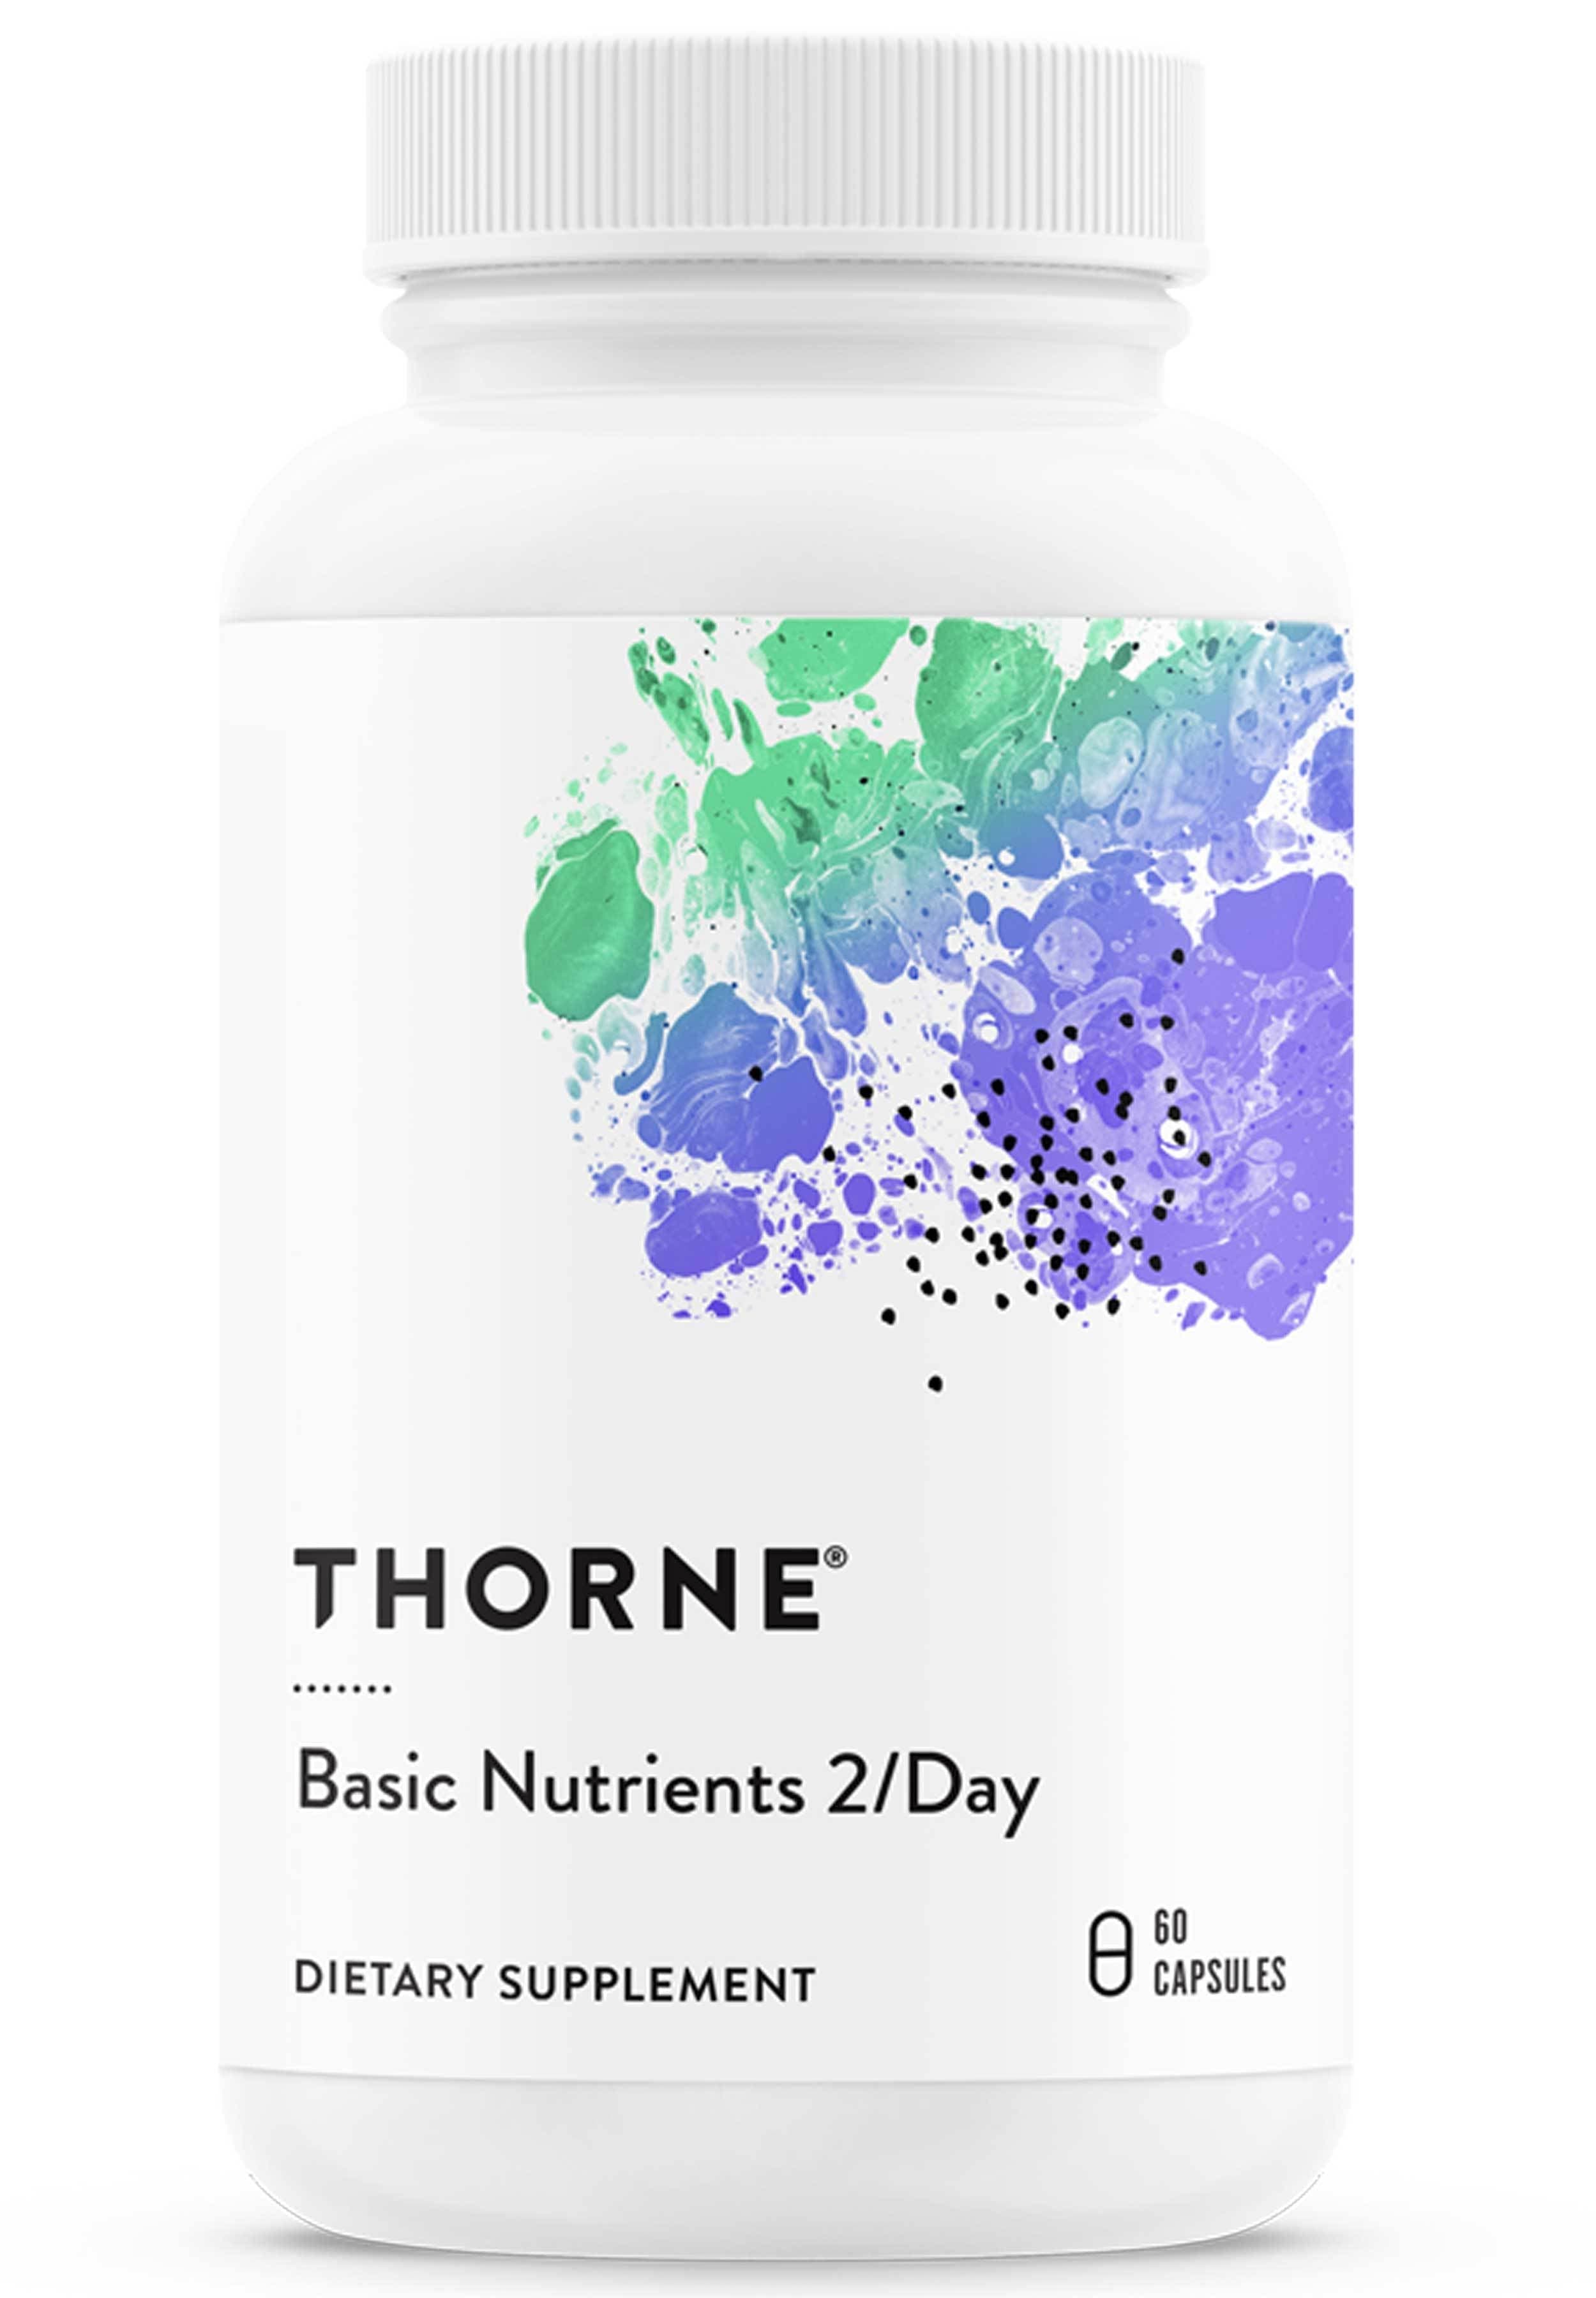 Thorne Research Basic Nutrients 2/Day